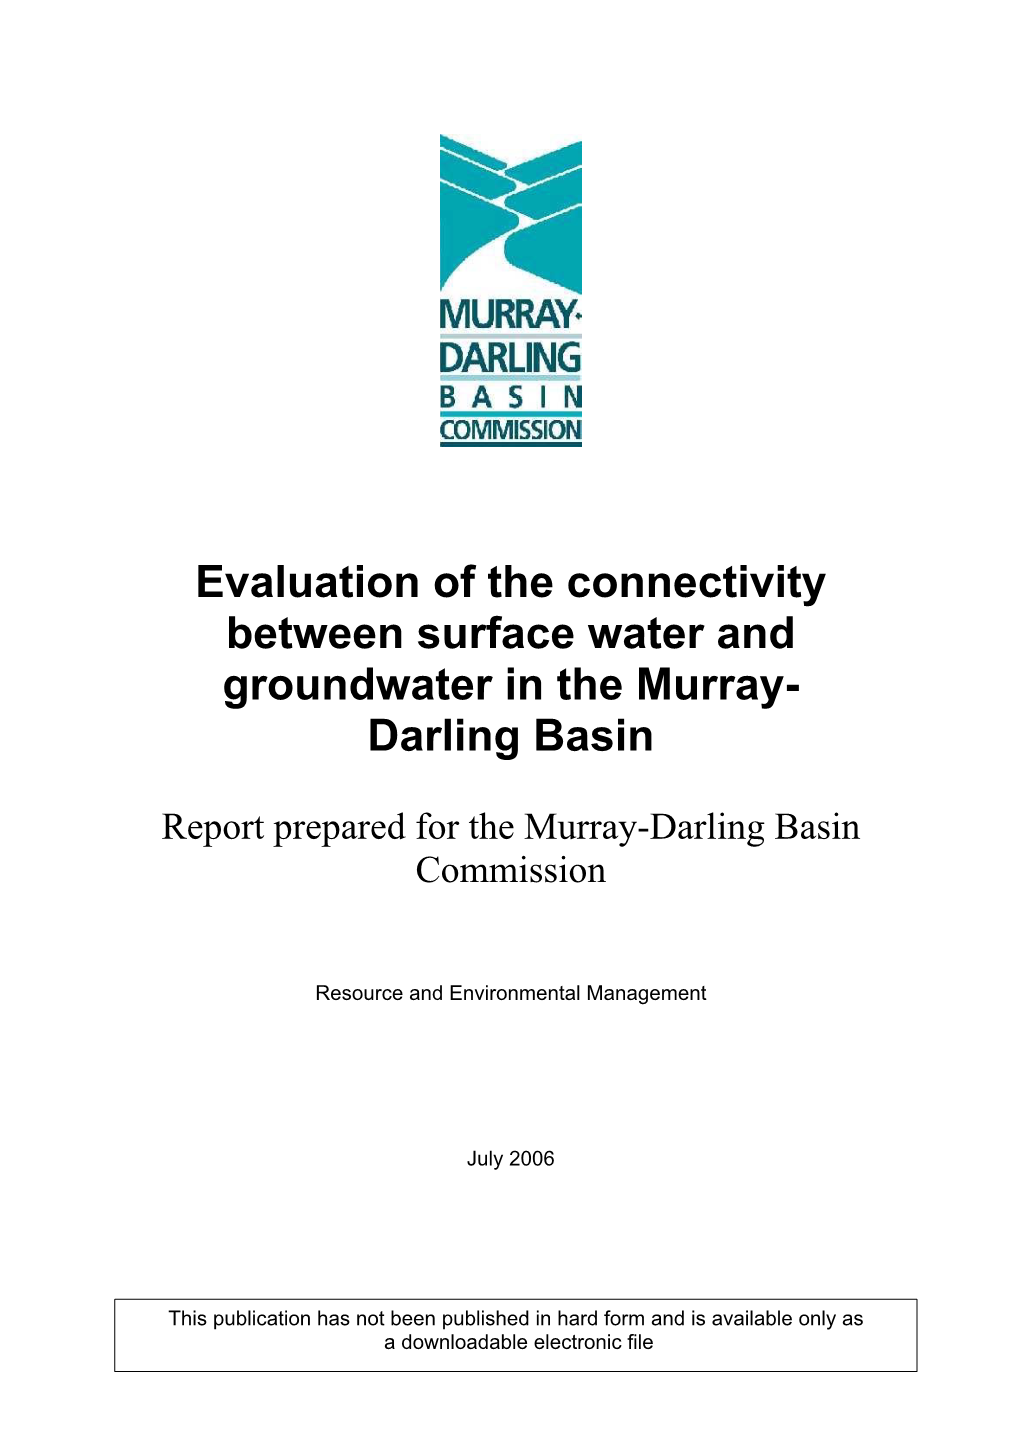 Evaluation of the Connectivity Between Surface Water and Groundwater in the Murray- Darling Basin